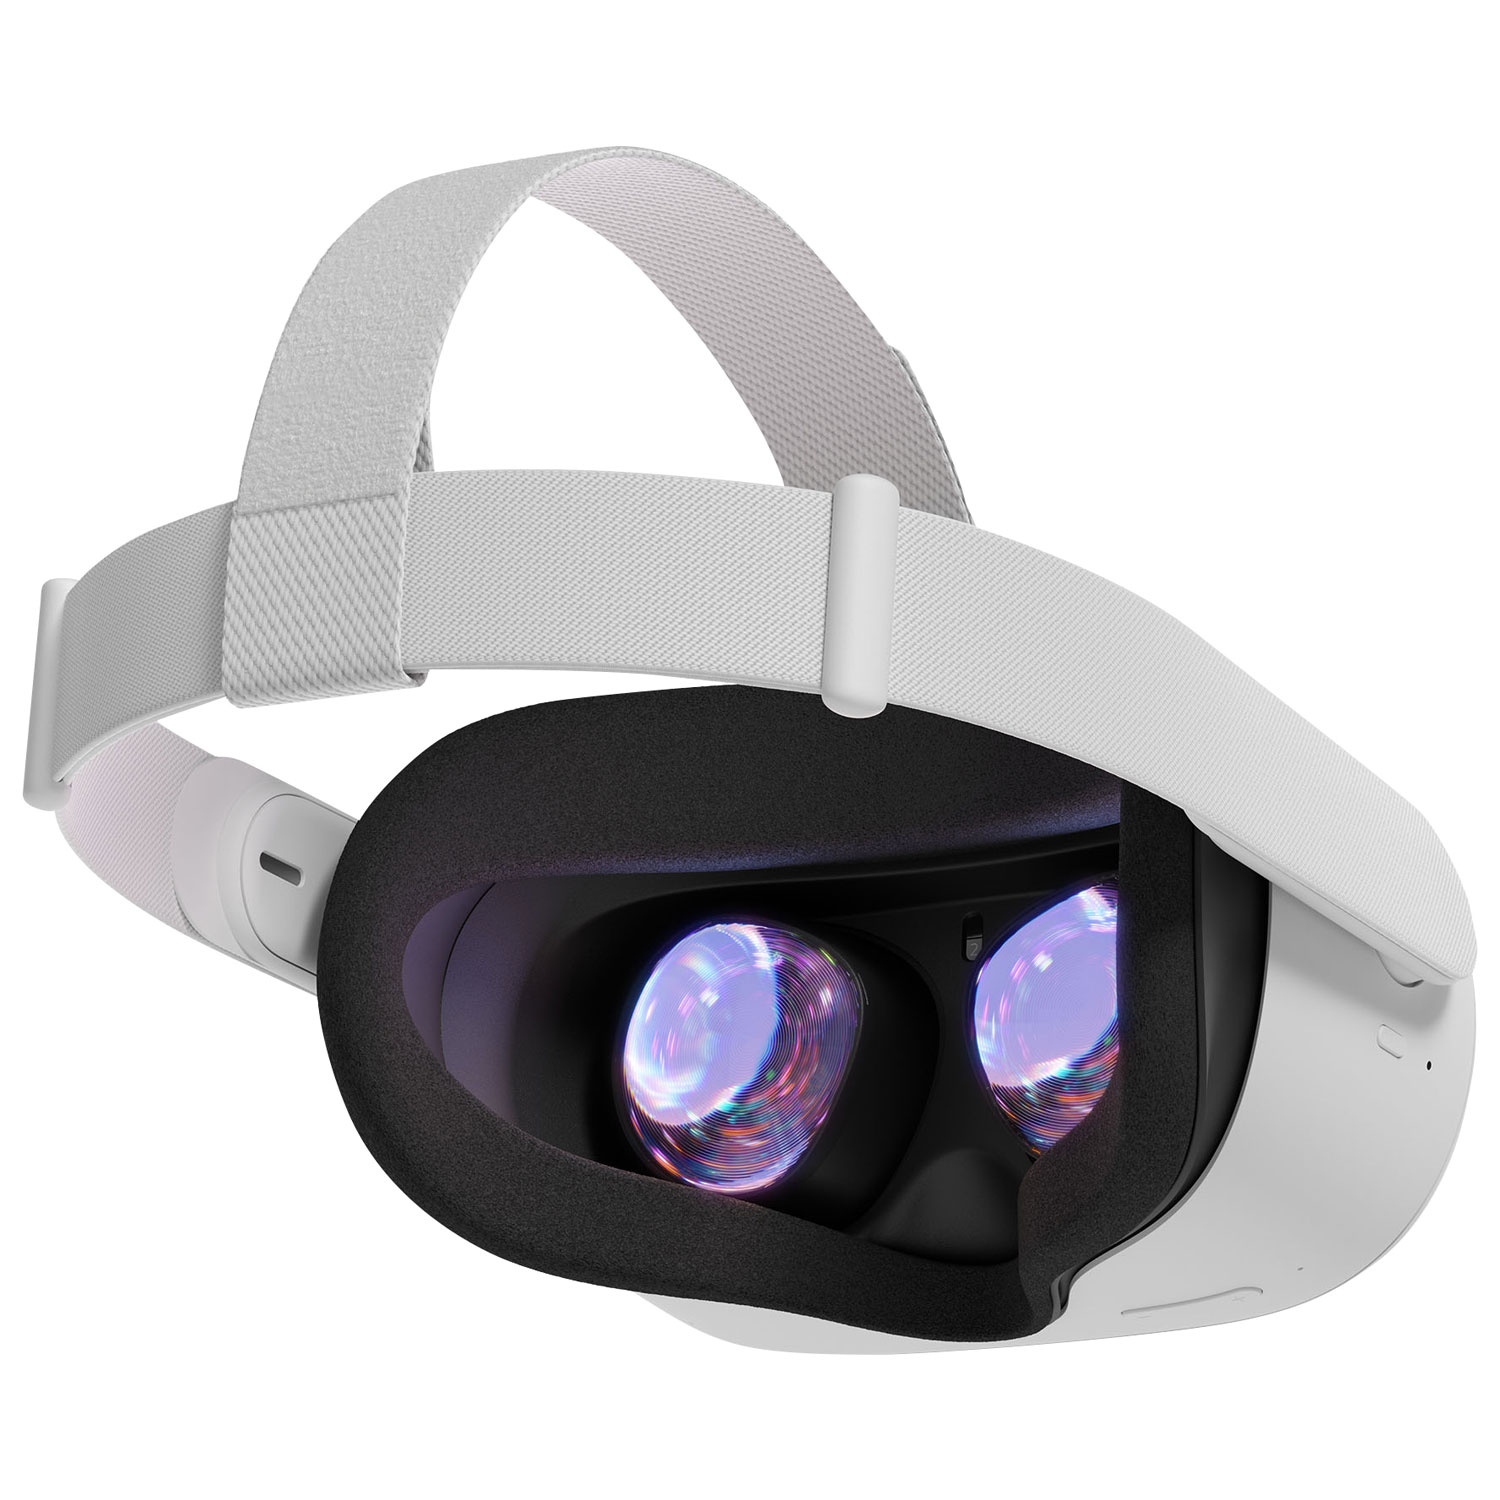 Meta Quest 2 256GB VR Headset with Touch Controllers | Best Buy Canada